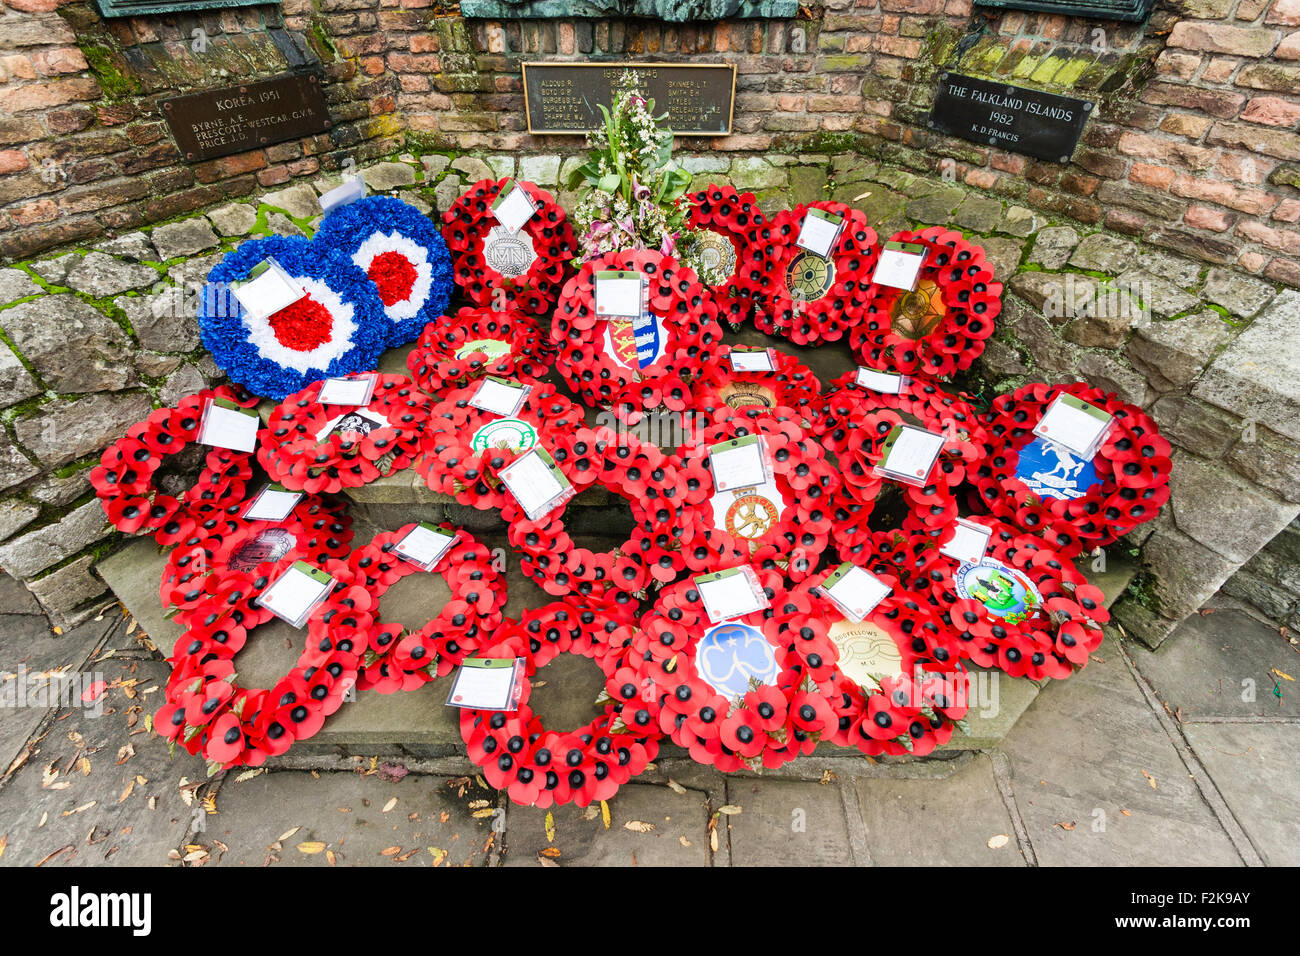 Remembrance Sunday in Britain in November to commemorate the dead of both world wars and other conflicts. Wreaths of poppies in front of war memorial. Stock Photo